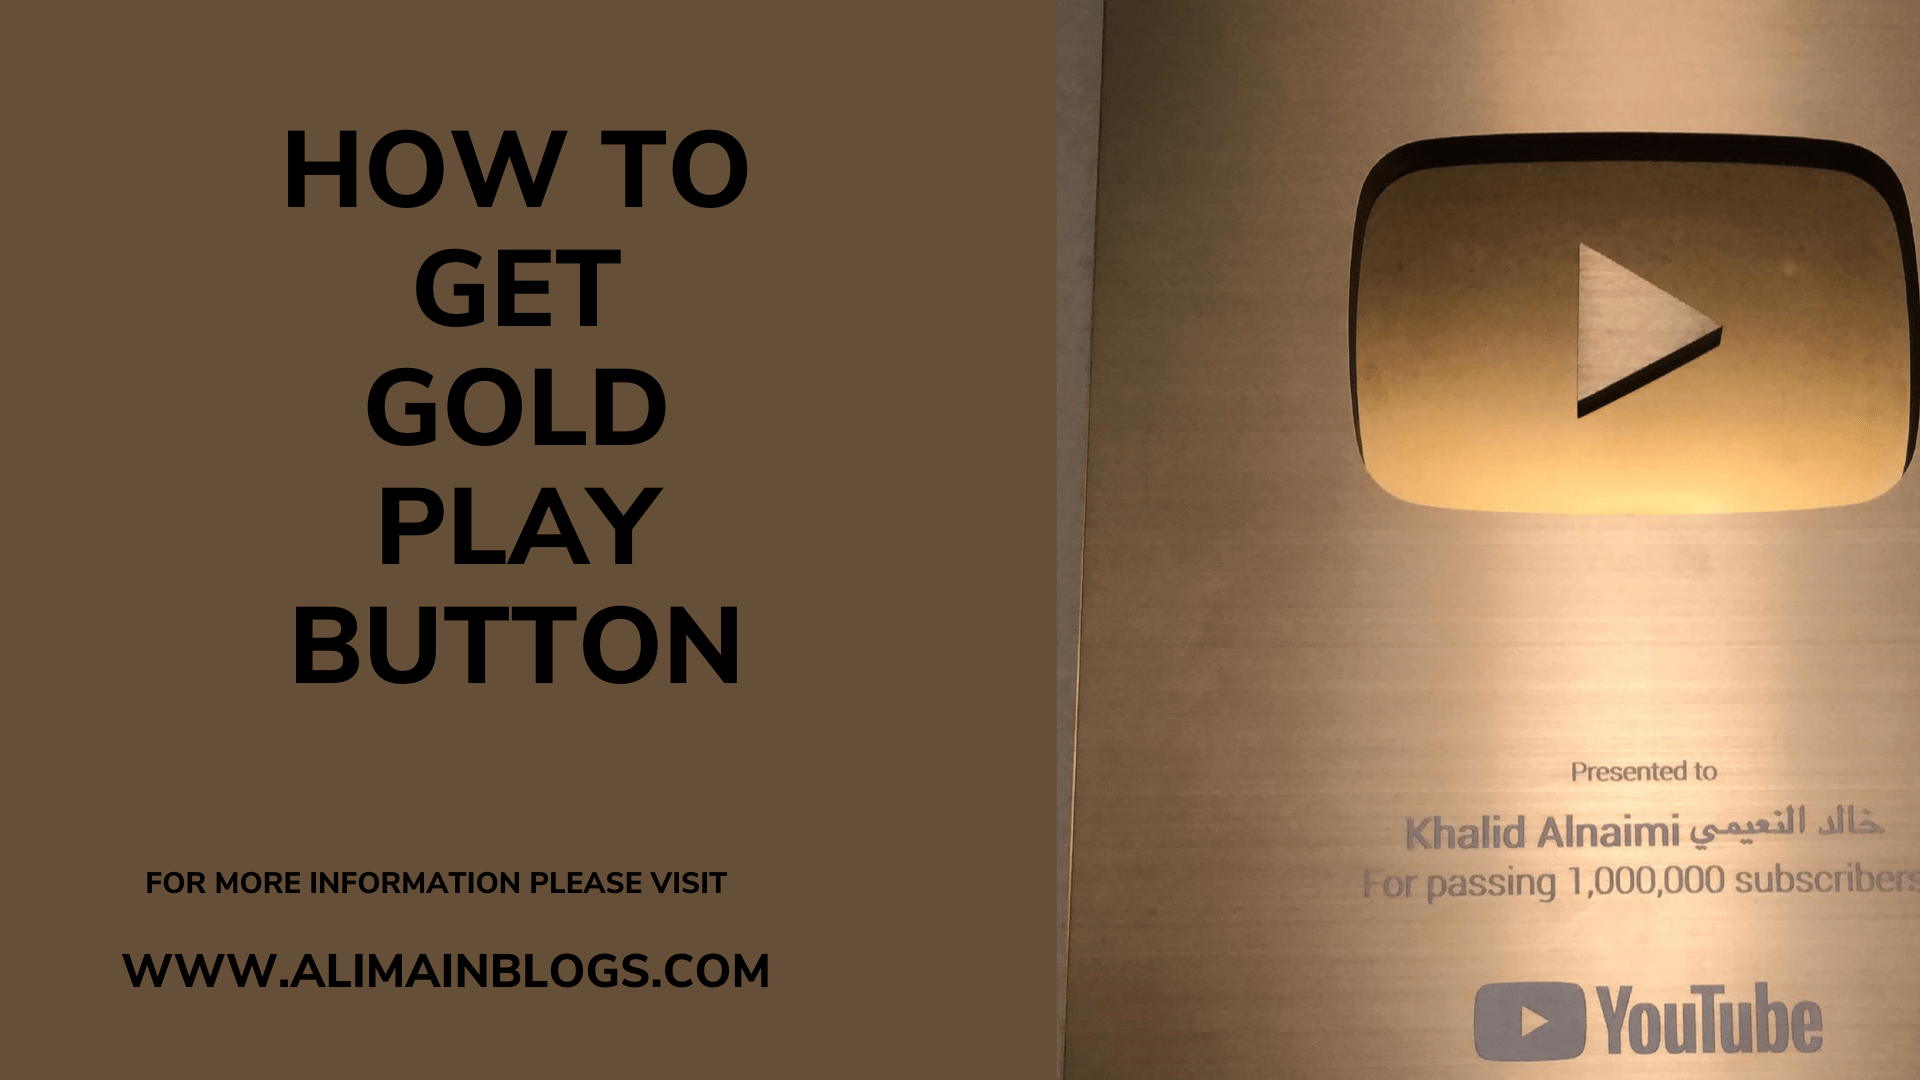 How to get gold play button